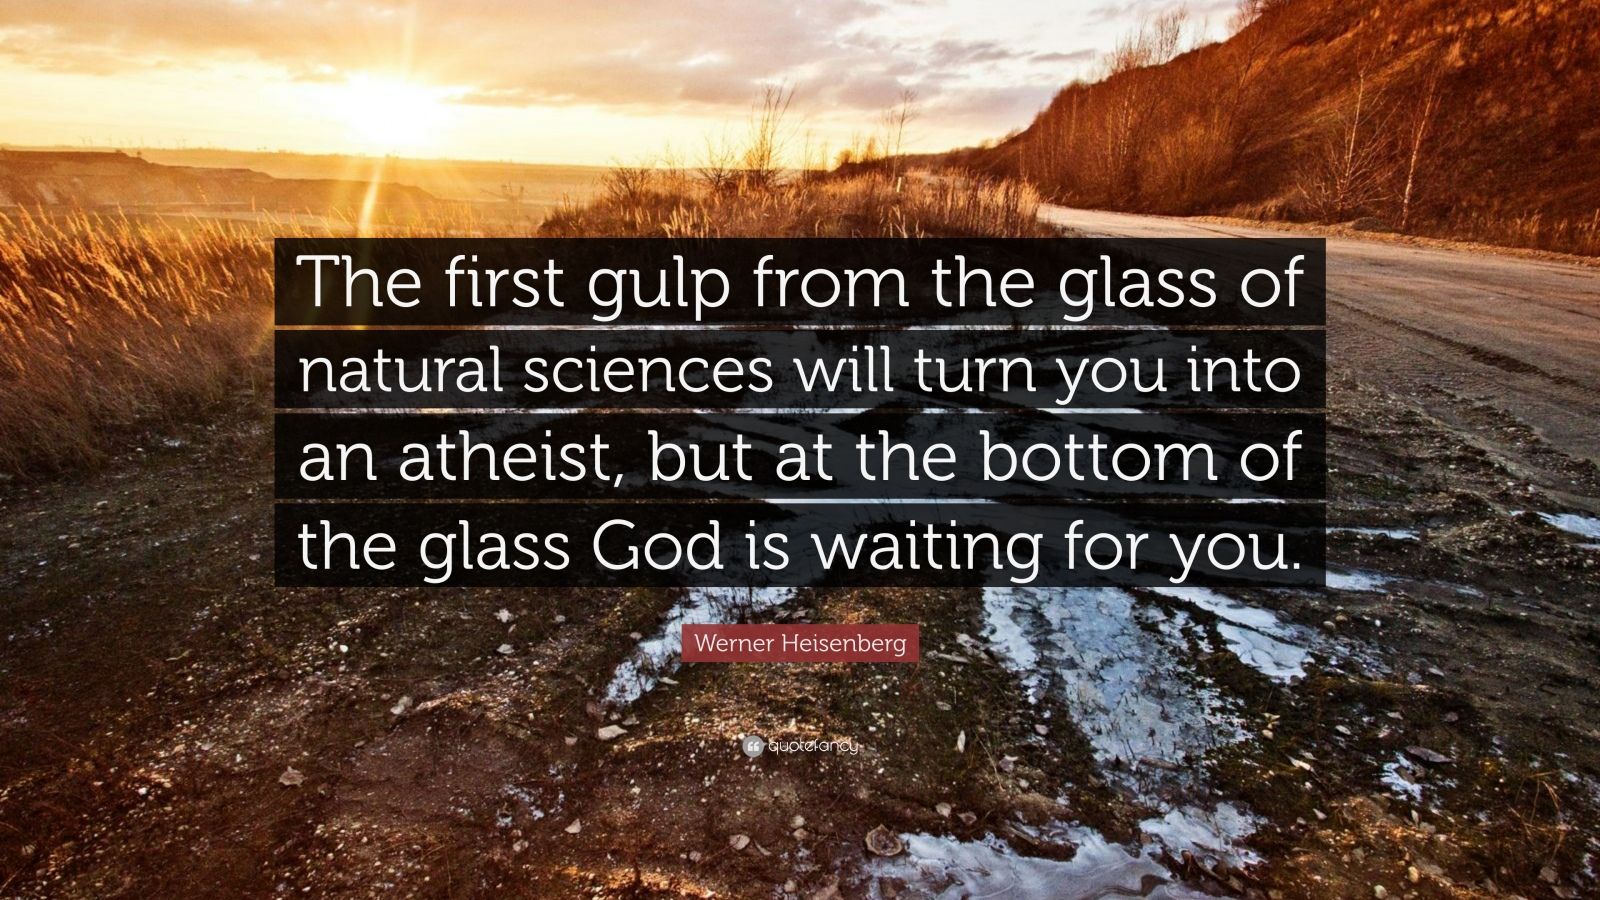 Werner Heisenberg Quote “The first gulp from the glass of natural